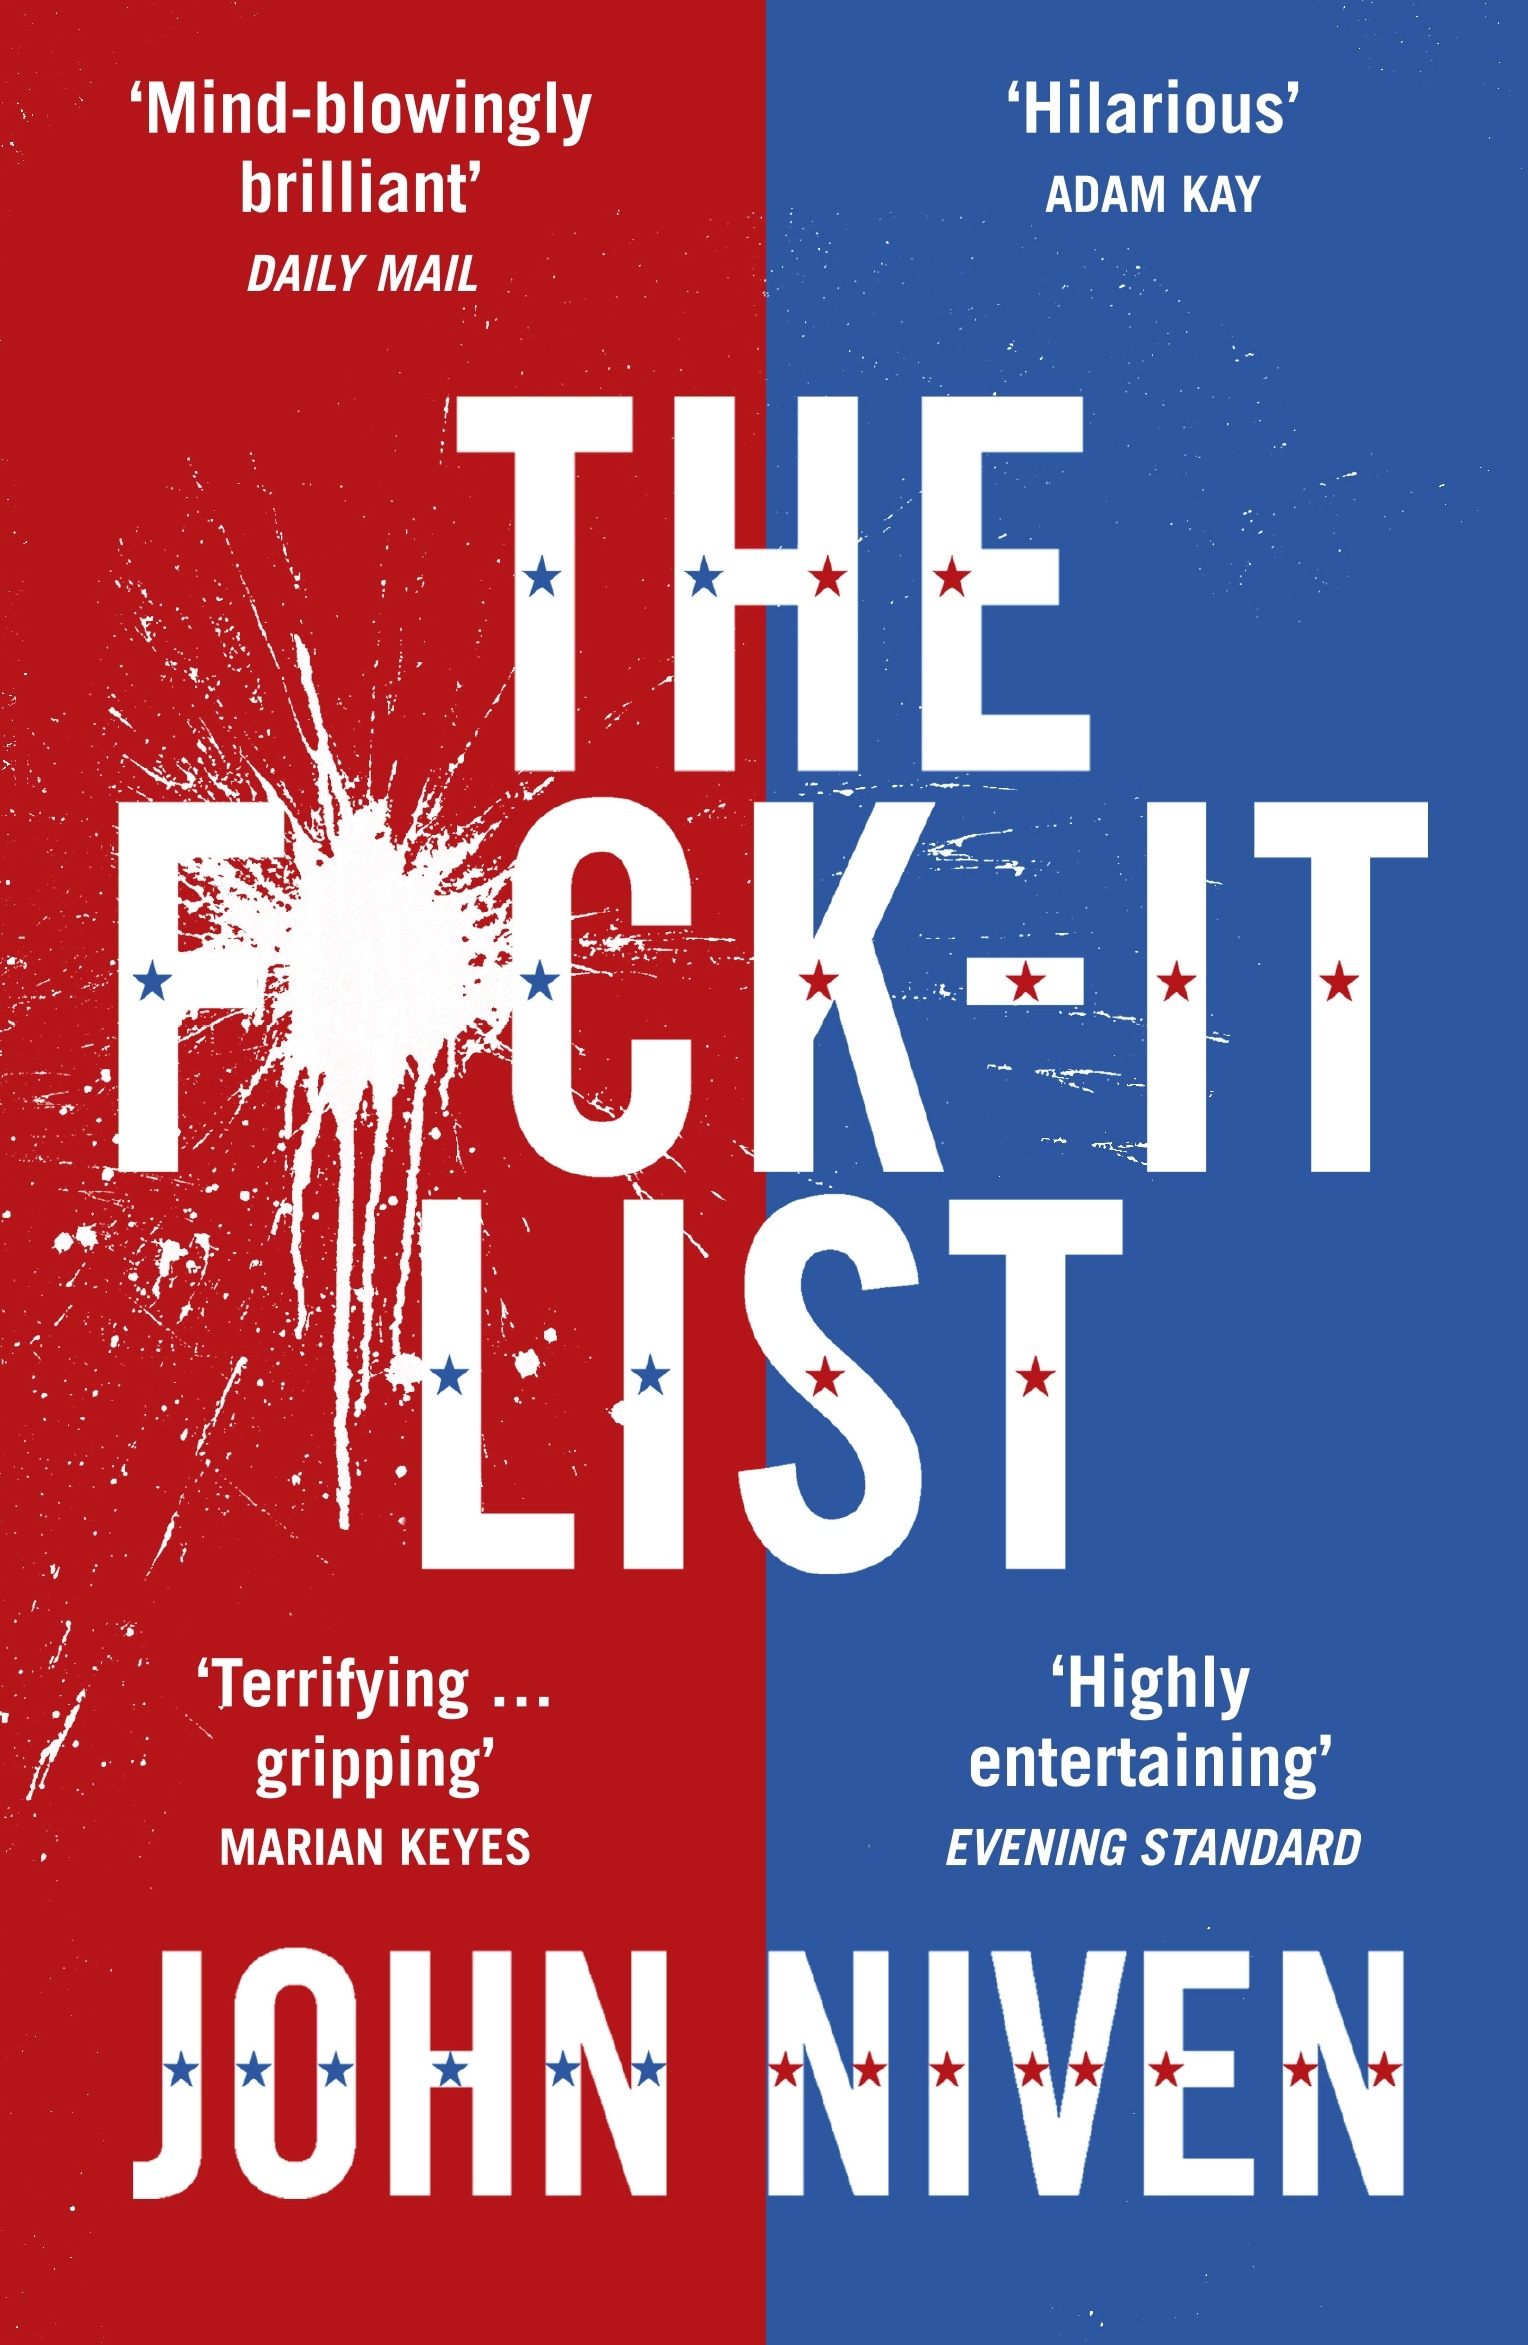 Book “The F*ck-it List” by John Niven — January 28, 2021